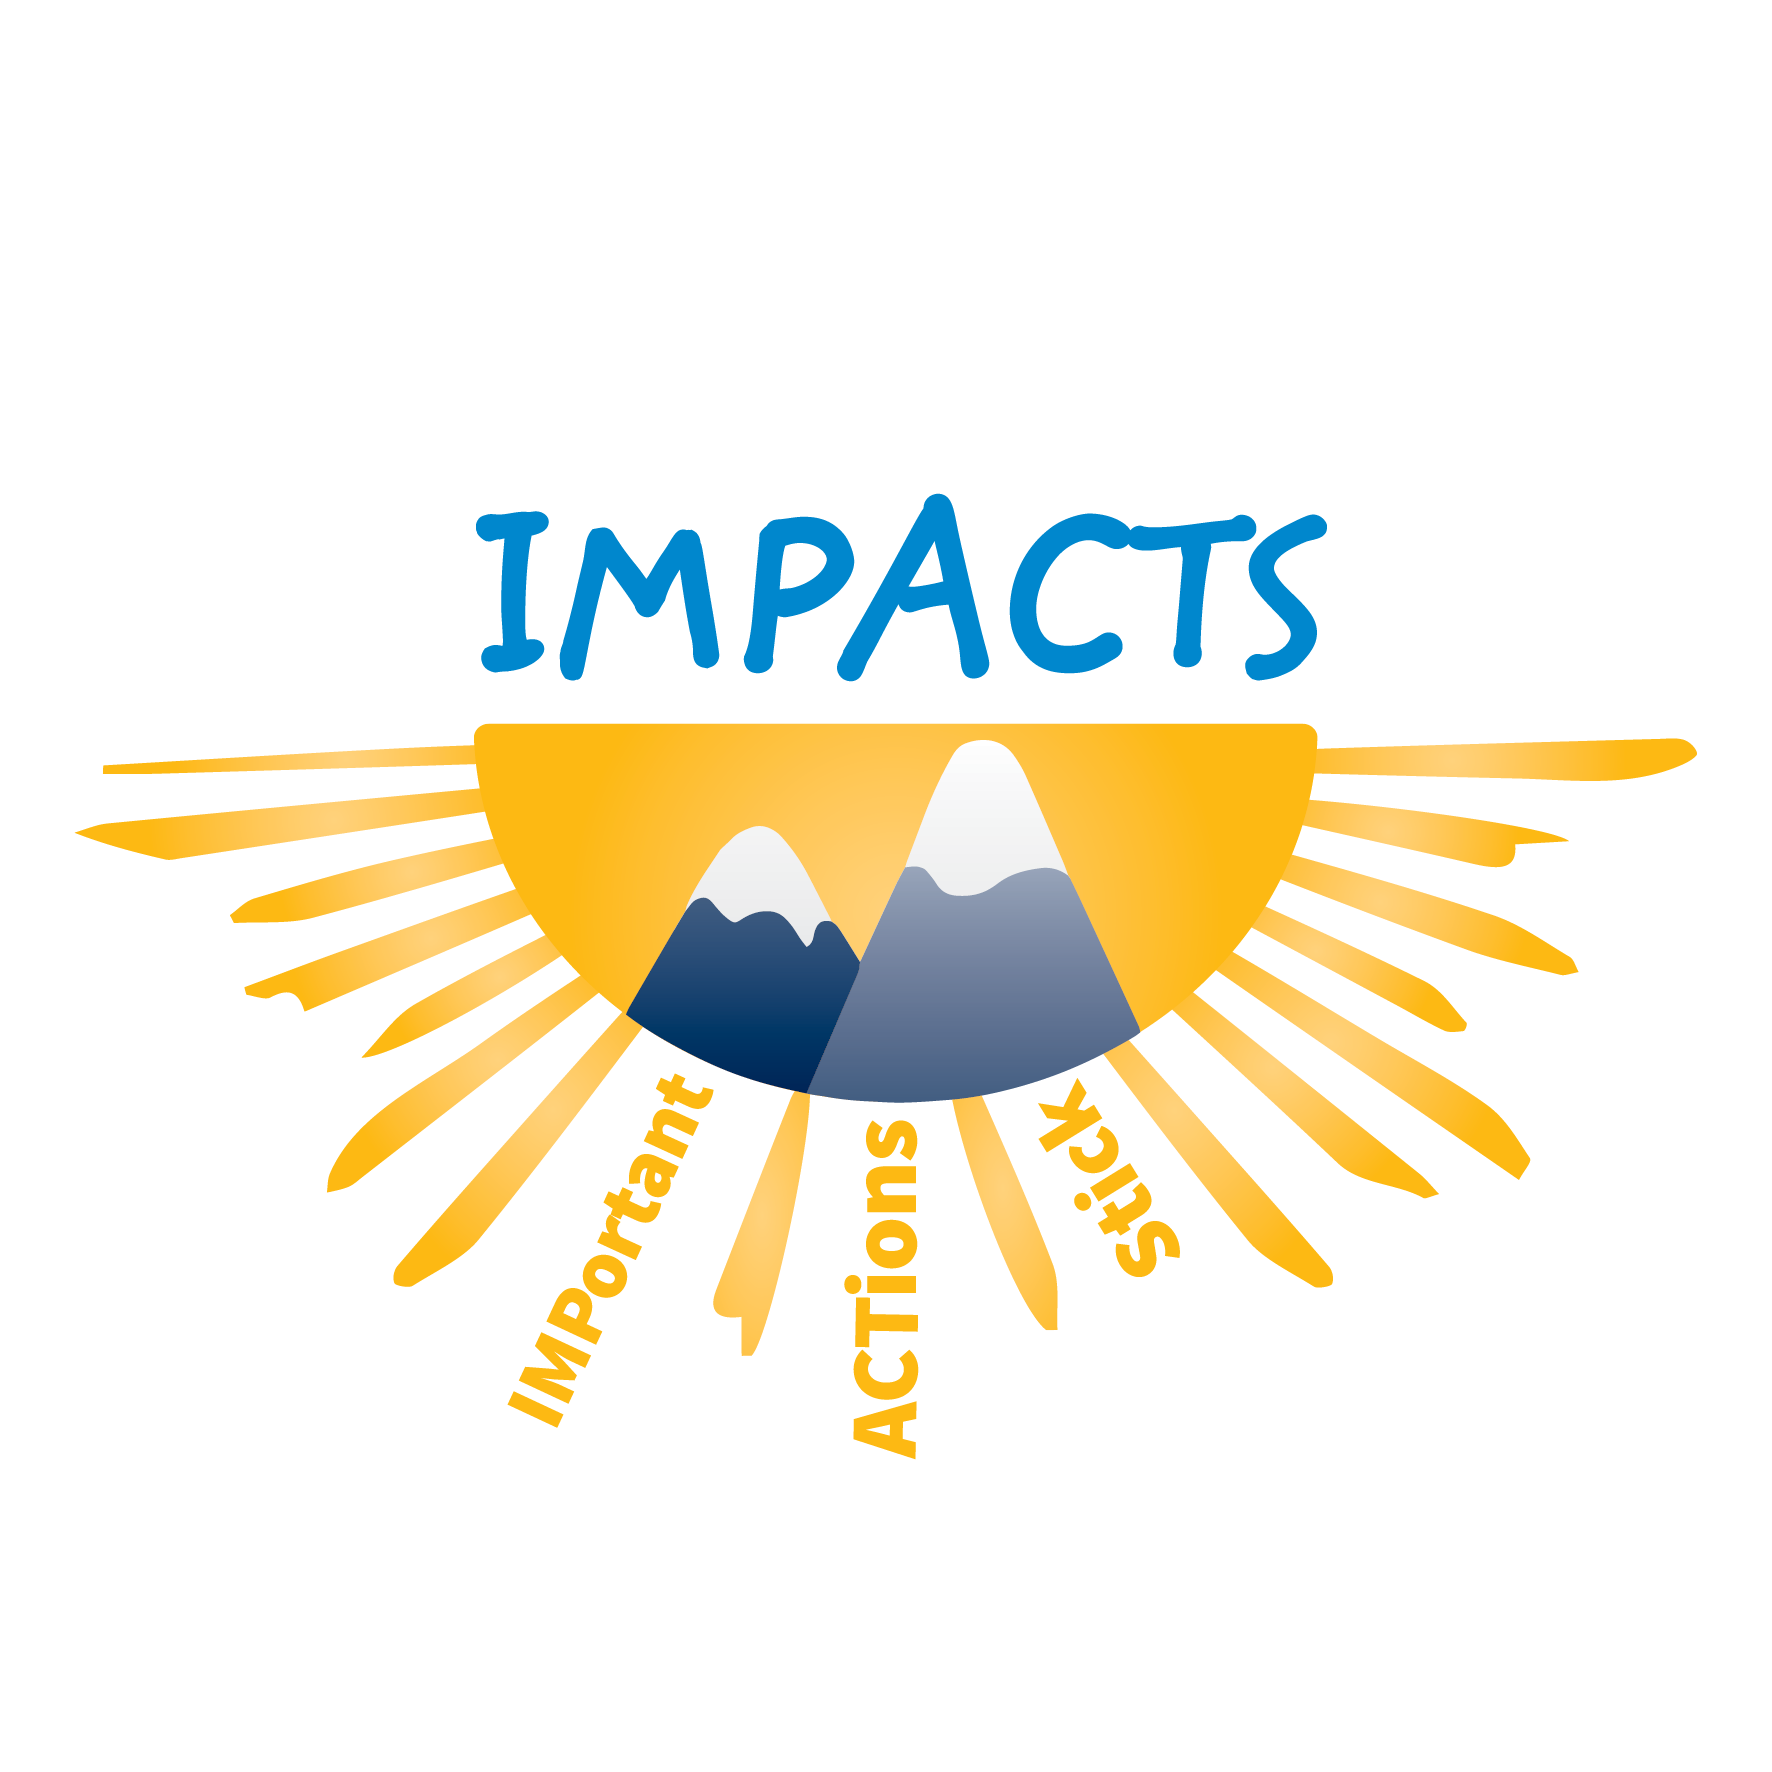 IMPACTS (Important Actions Stick) online training 